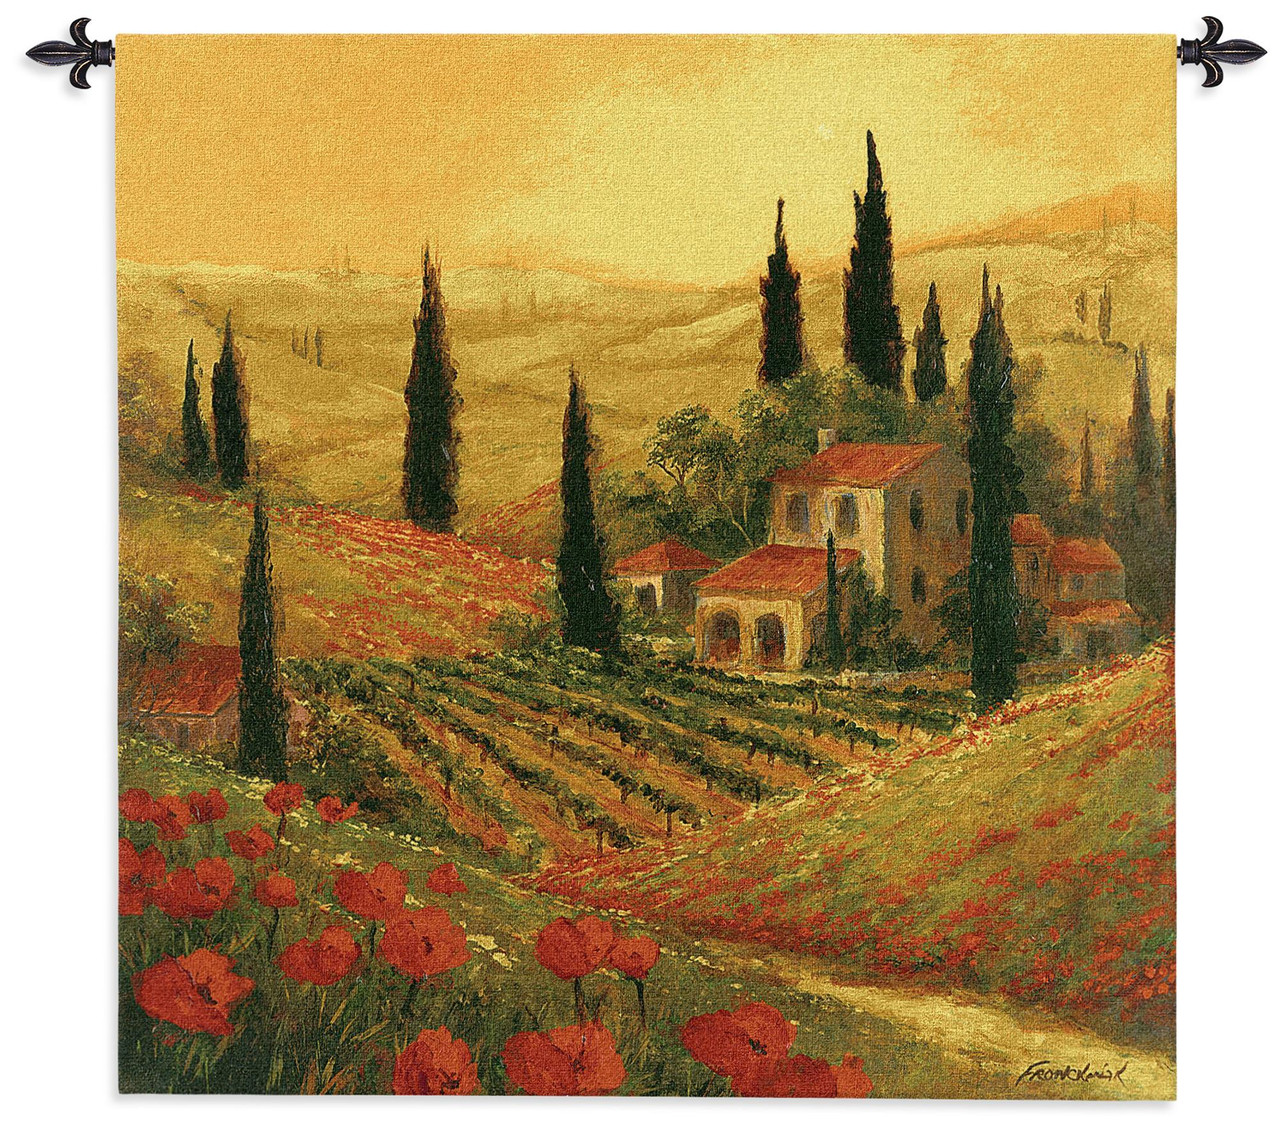 Poppies of Toscano Woven Tapestry Wall Art Hanging Golden Italian  Sunset over Vineyard Hillsides 100% Cotton USA Size 53x53